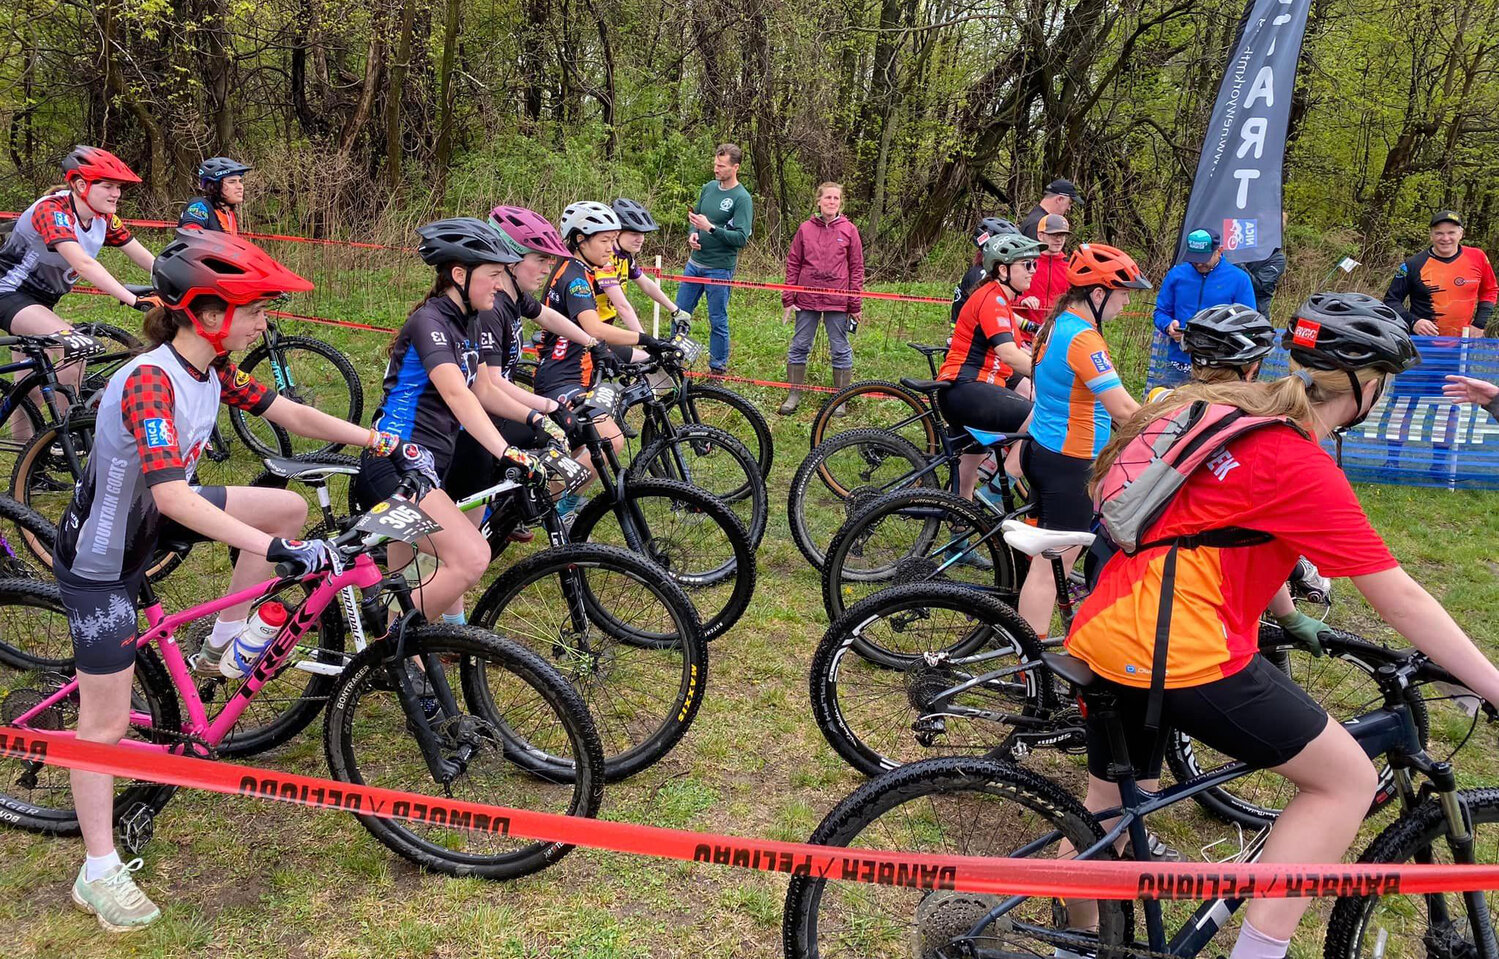 Participants line up at the start of a recent National Interscholastic Cycling Association New York League race. The schedule includes a stop this weekend at Tilden Hill Farm Vernon.